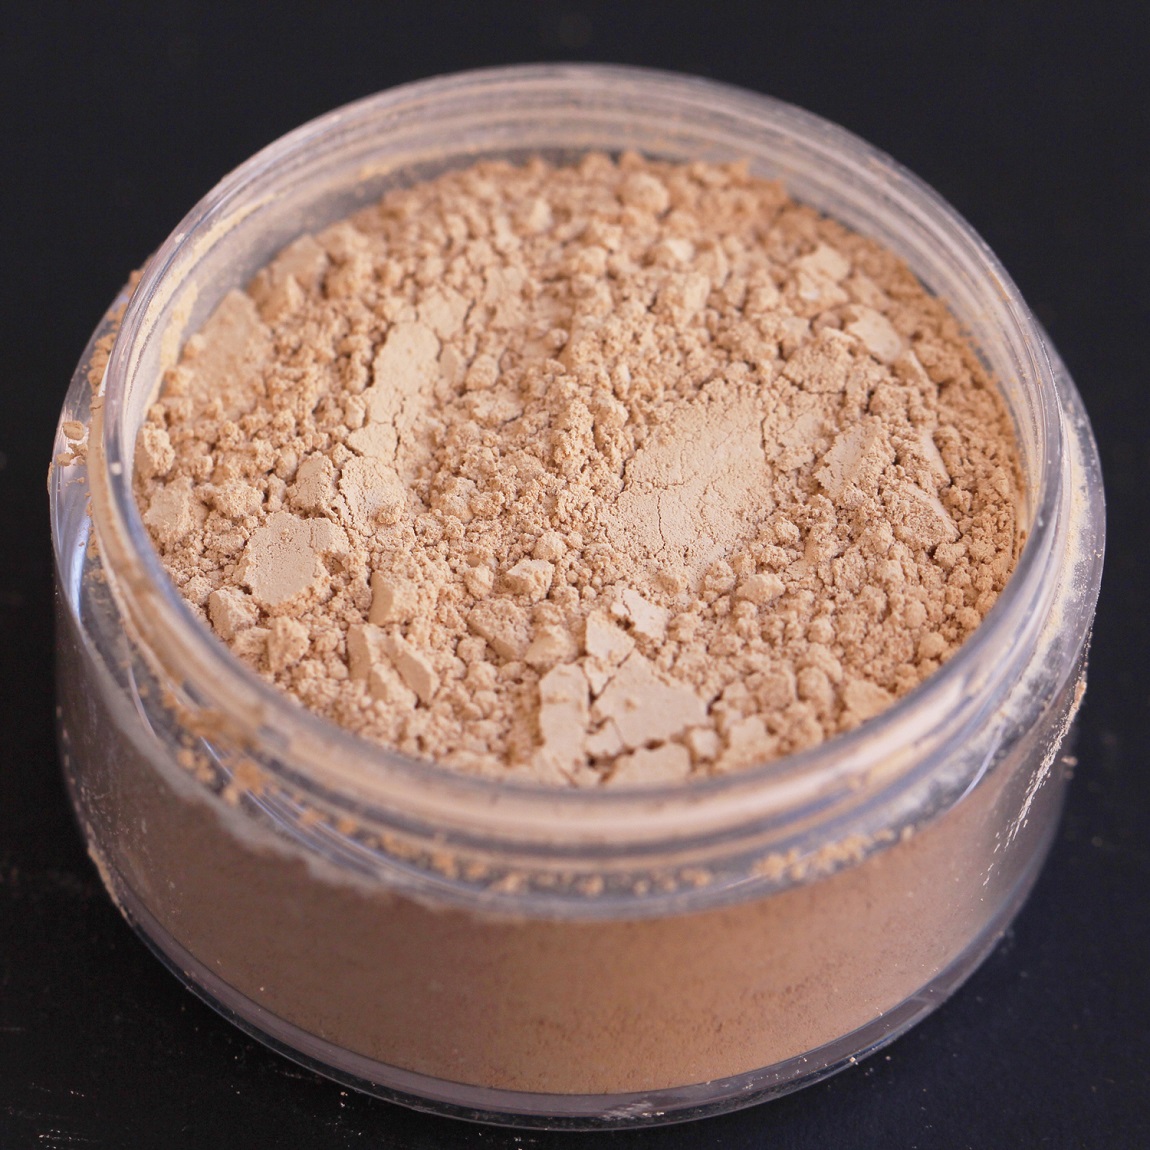 The lightness of the High Coverage mineral foundation.